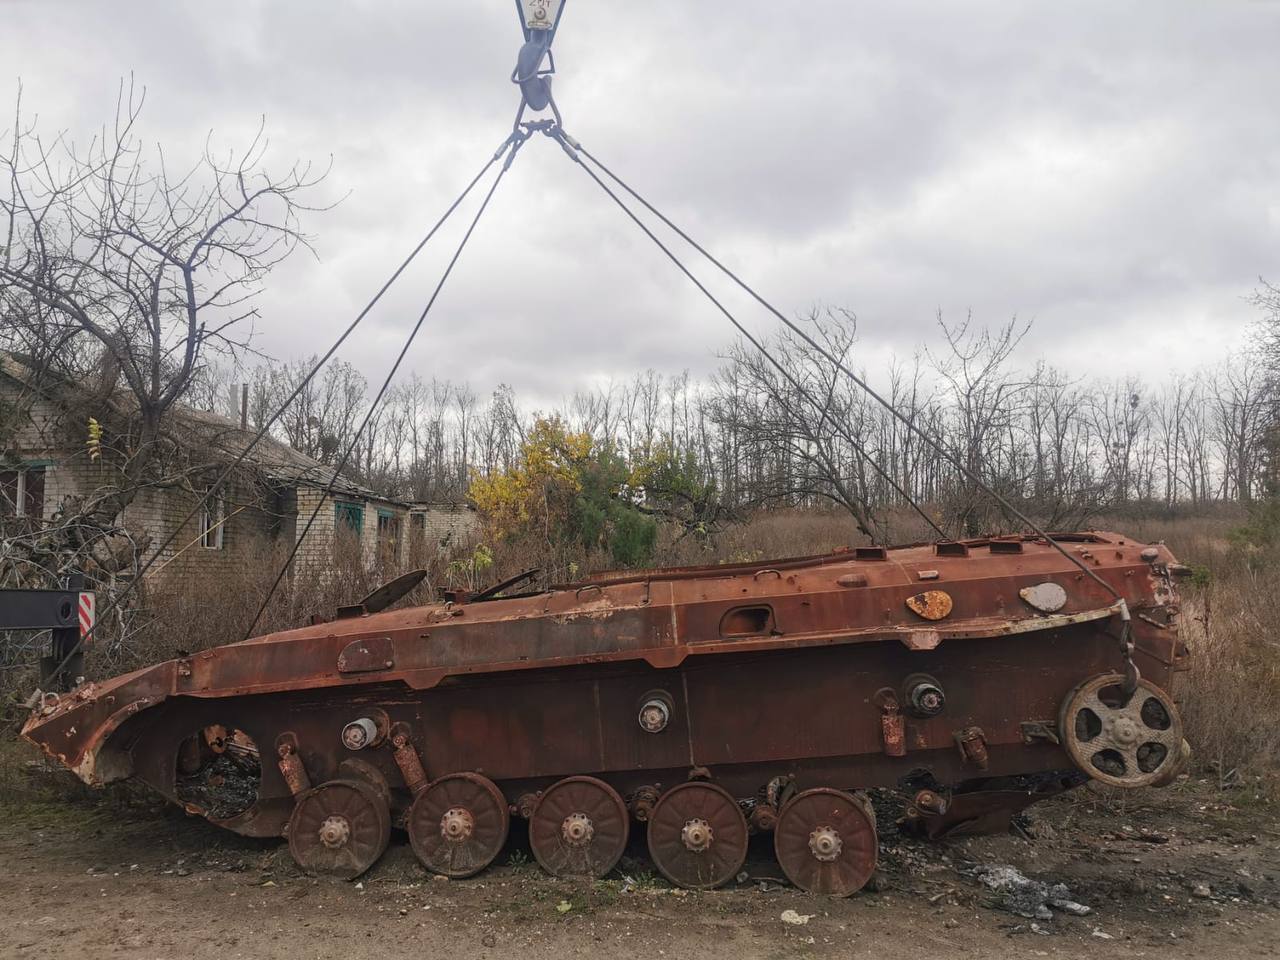 In Ukraine, they have started clearing the land of scrap metal left by Russians